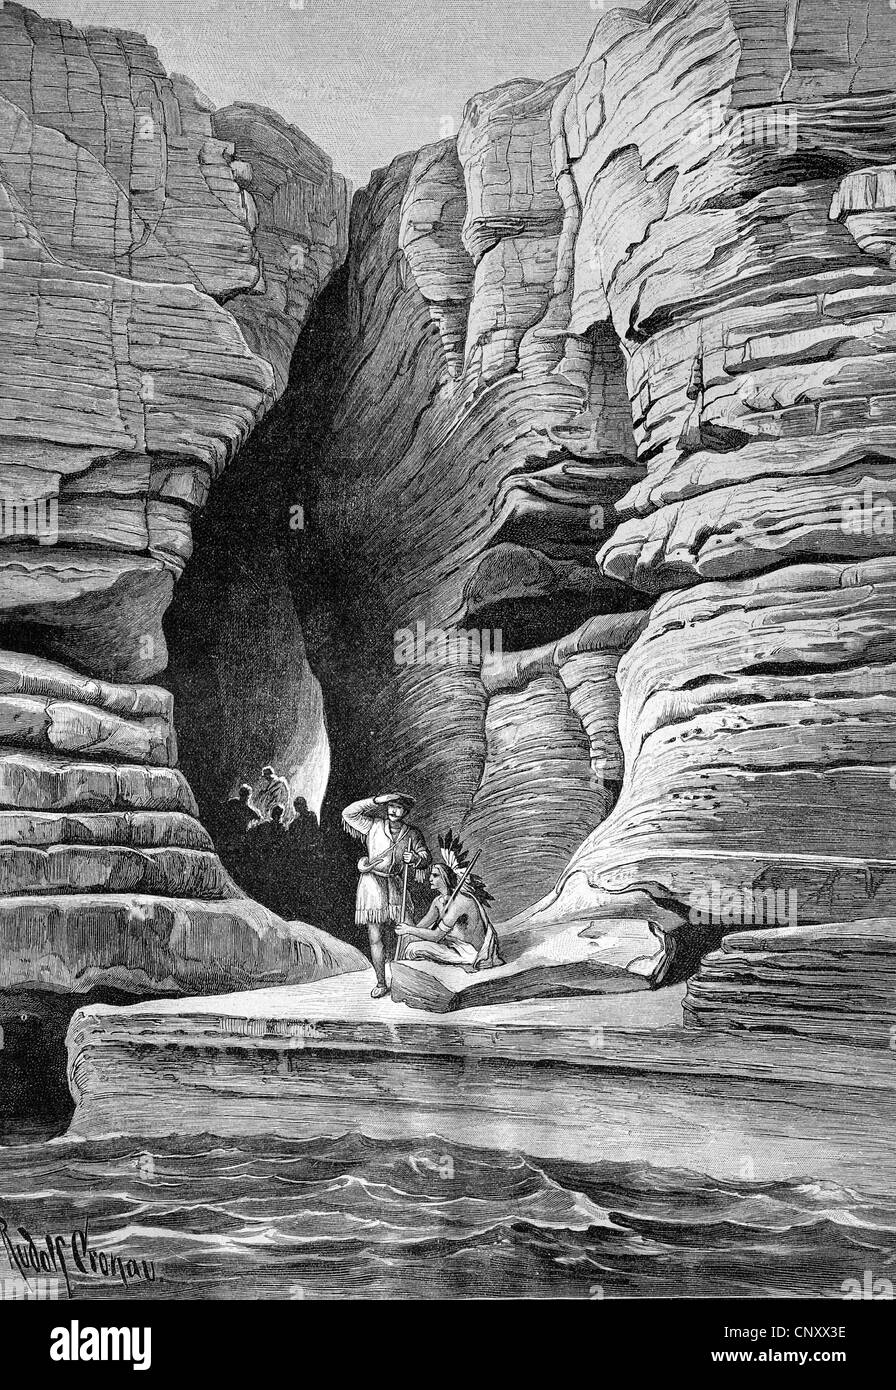 The Leatherstocking cave on Hudson island near Glens Falls, USA, historic wood engraving, about 1897 Stock Photo